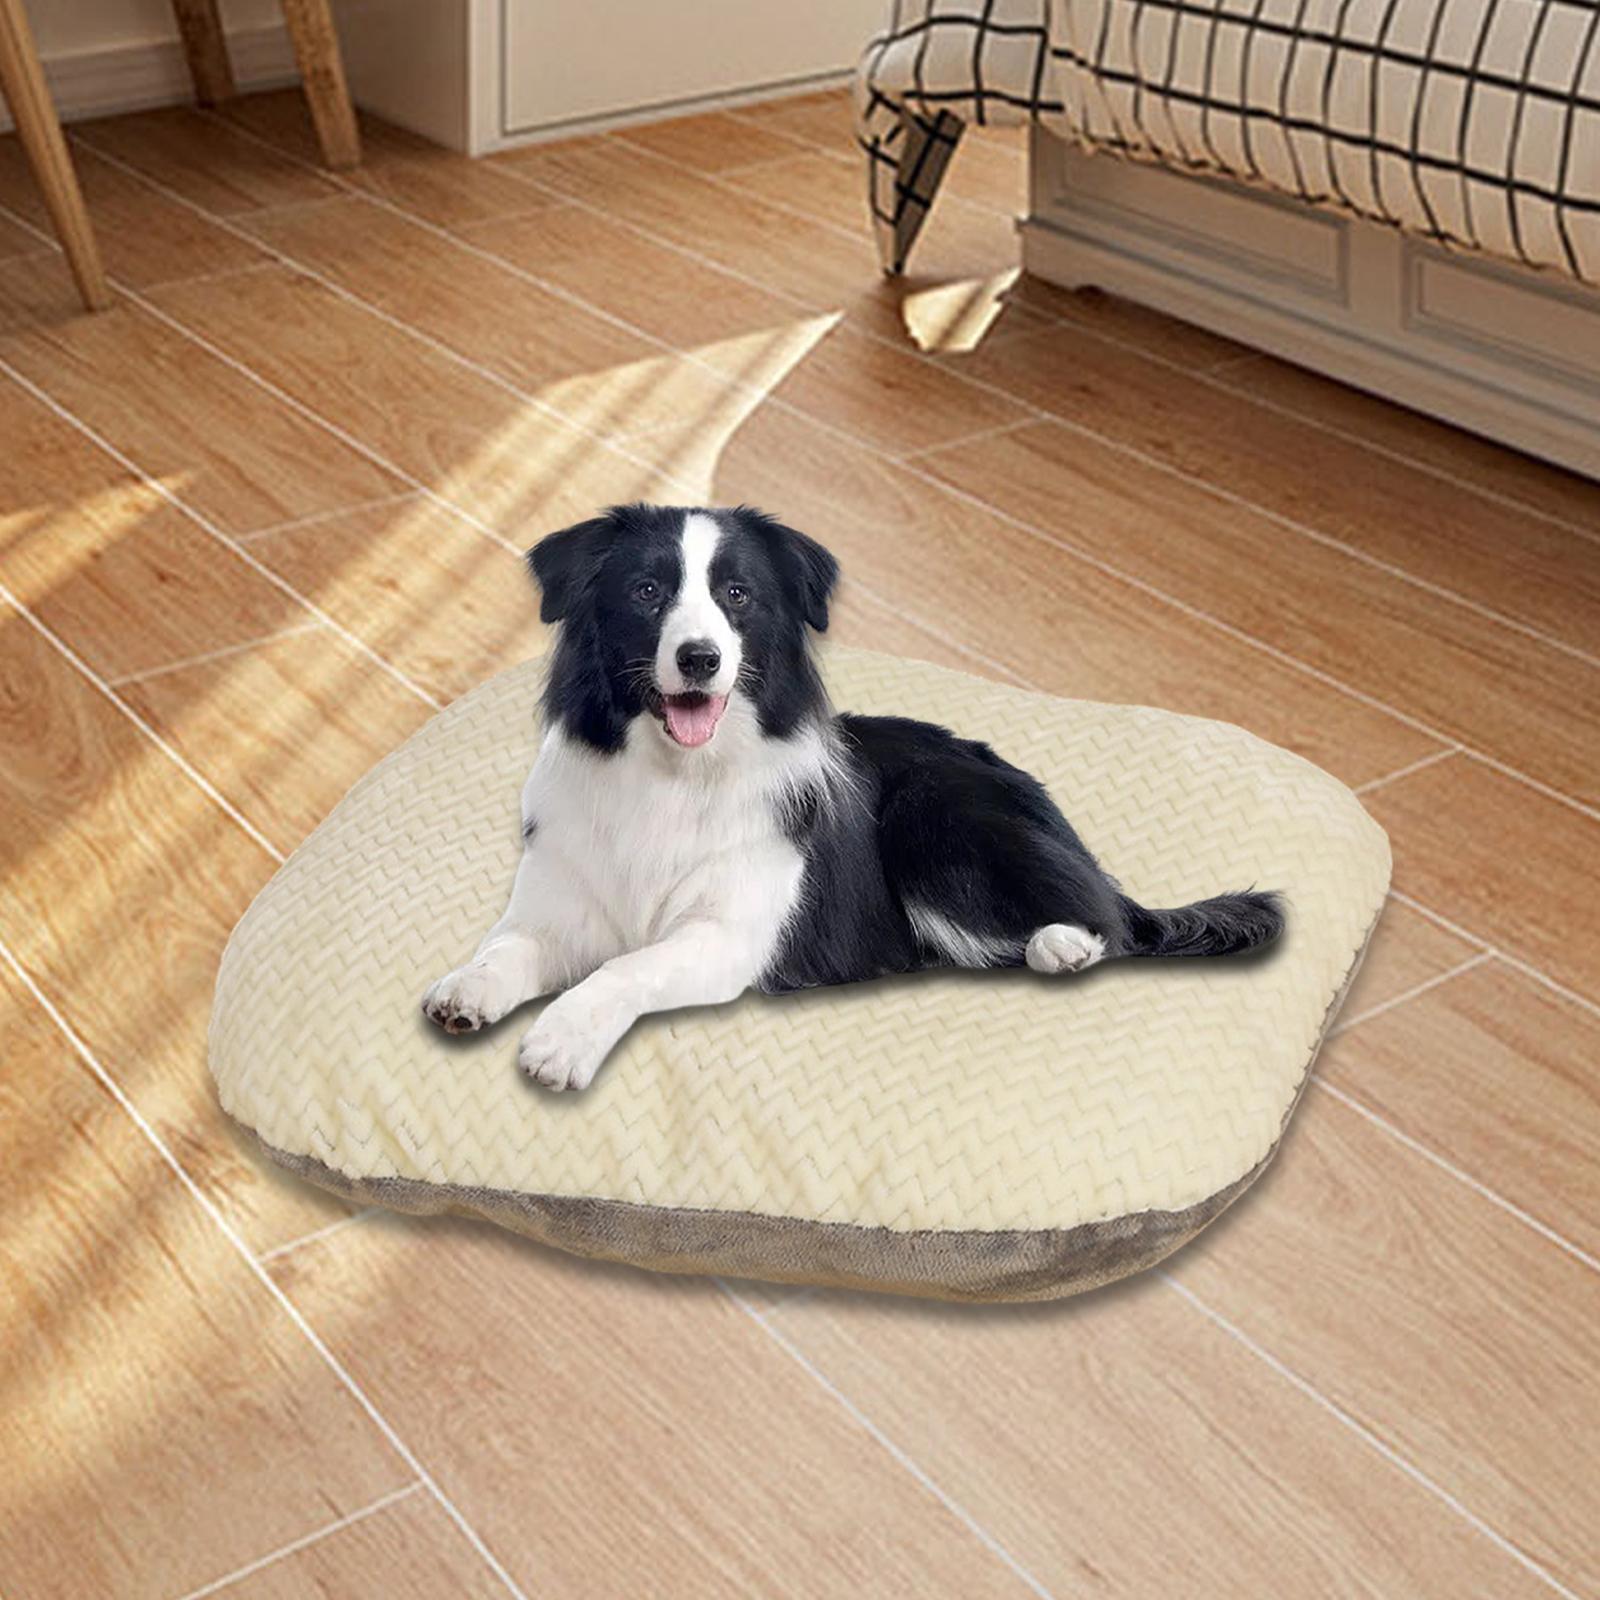 Dog Crate Bed Cushion Comfortable Warm Pet Kennel Bed for Dogs Puppy Rabbits